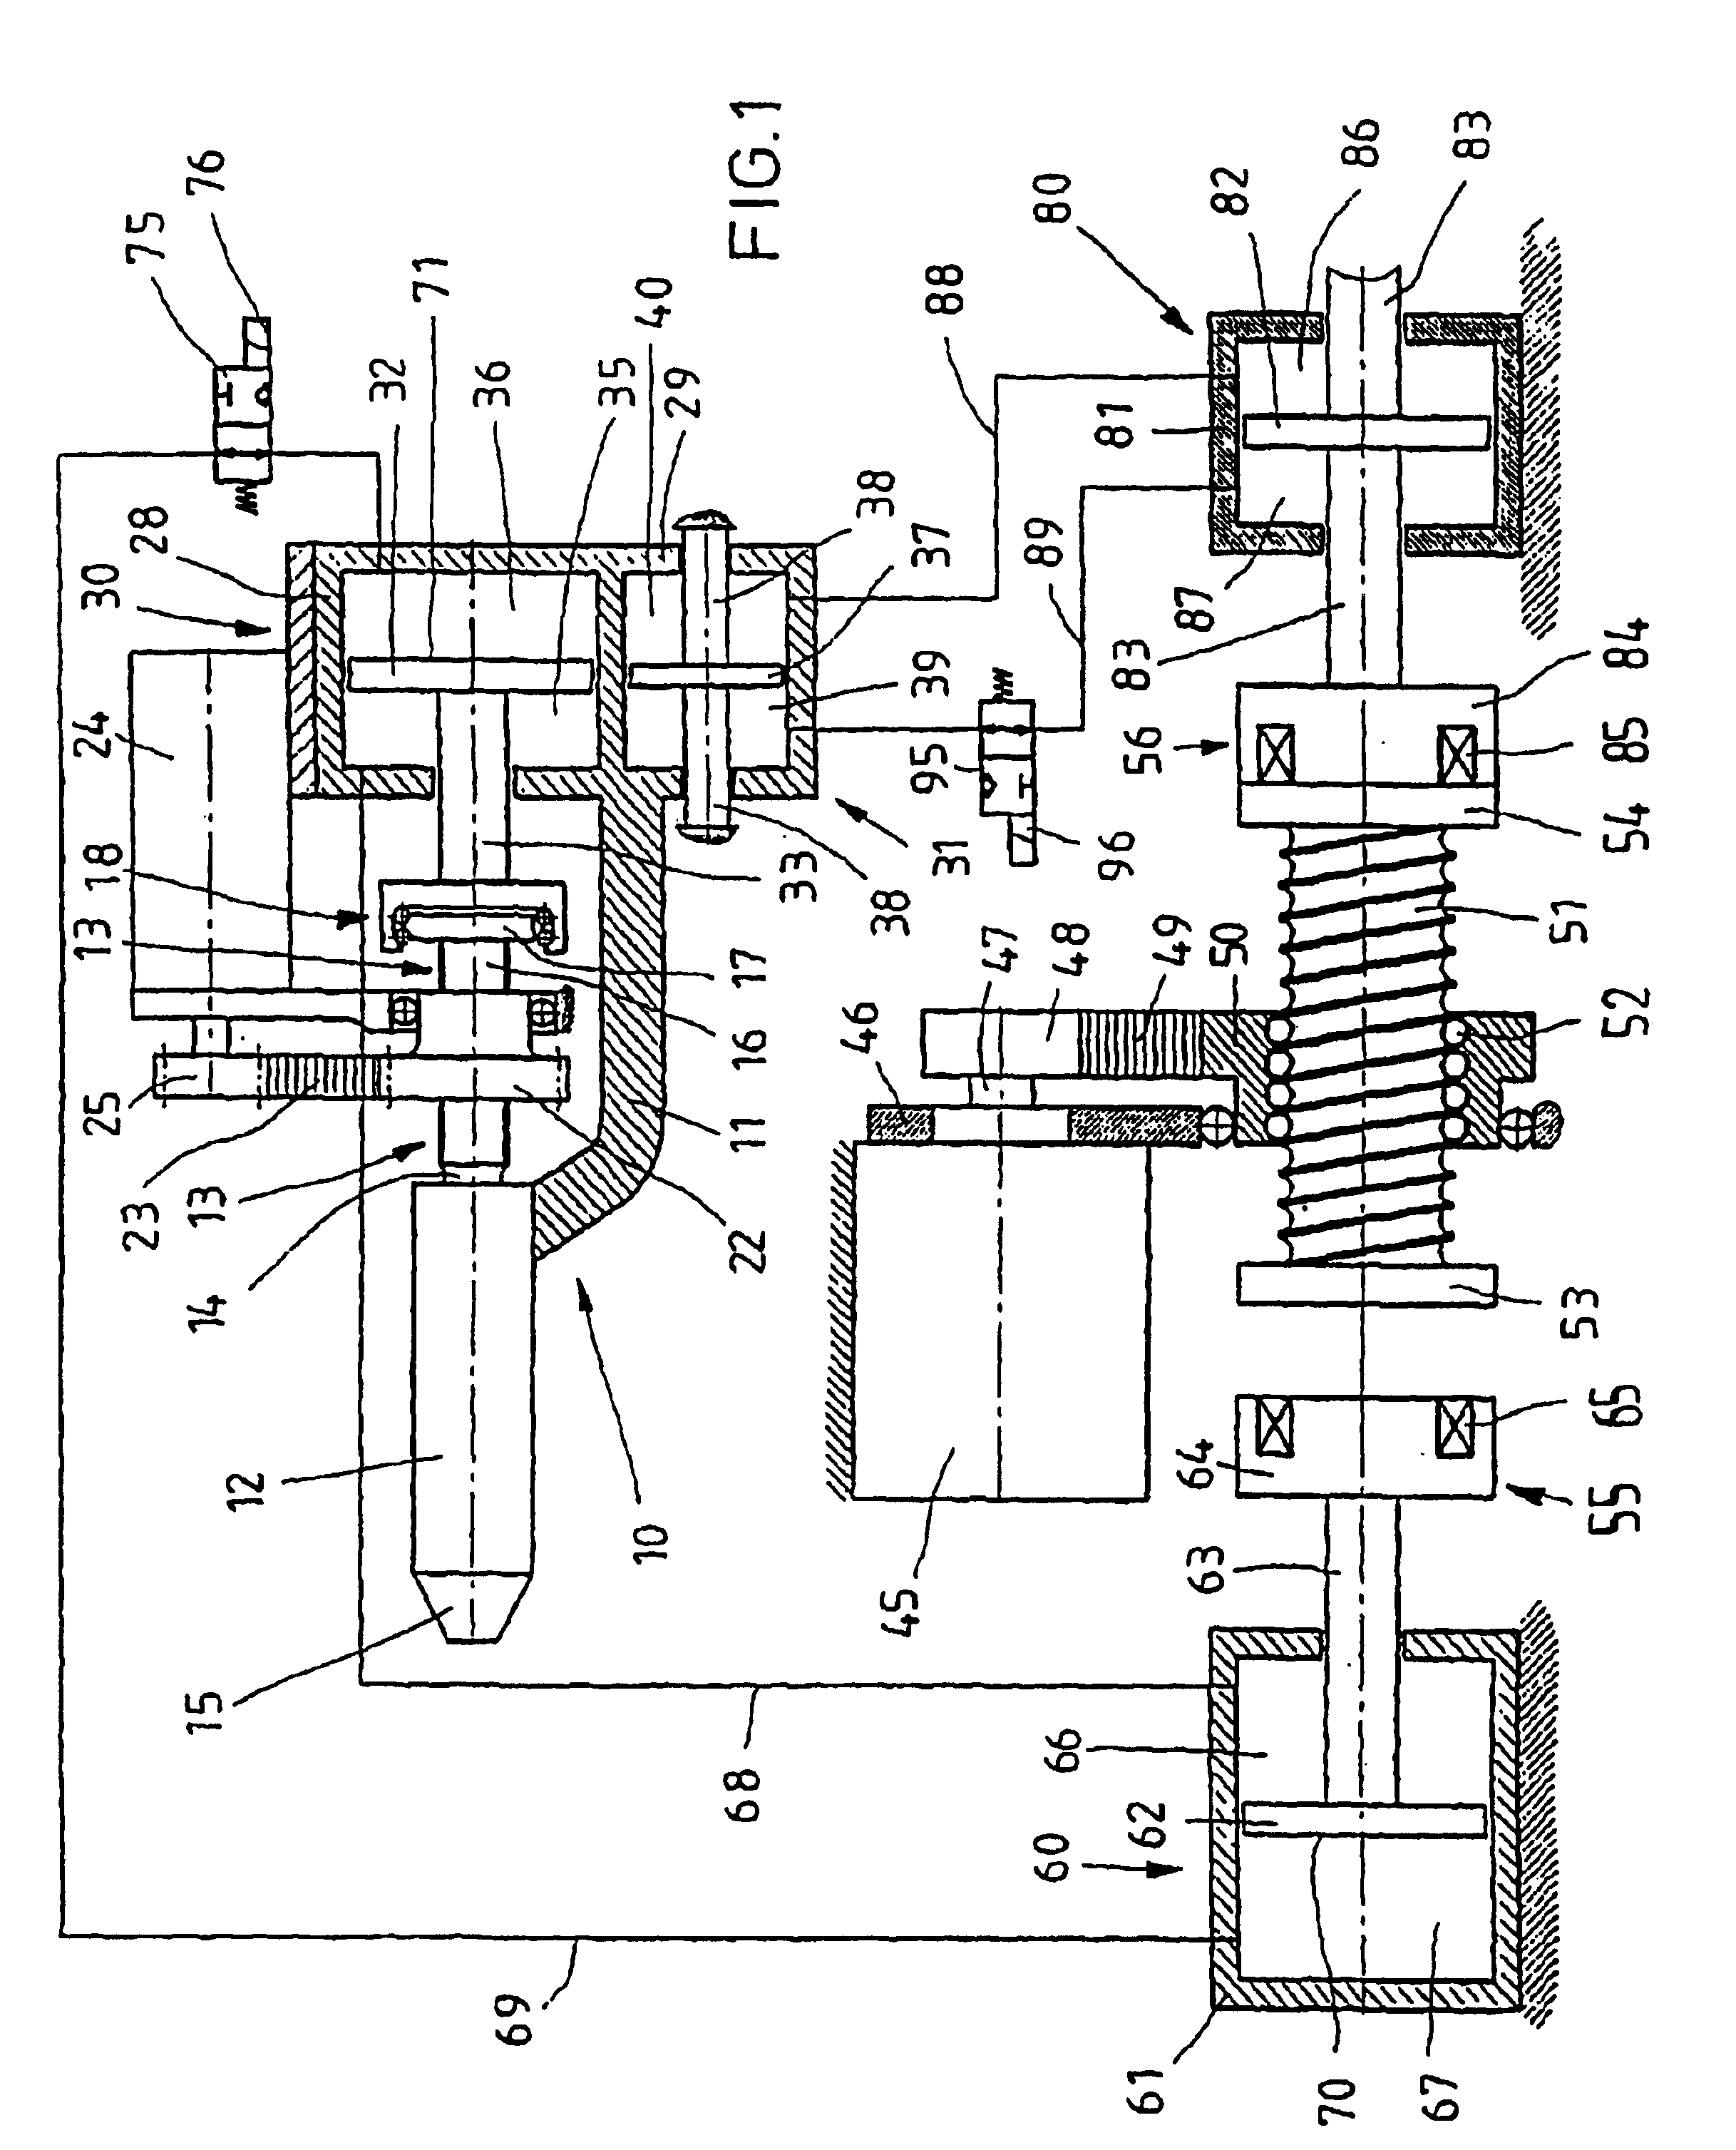 Drive device for displacing two linearly moveable components pertaining to a plastic injection moulding machine